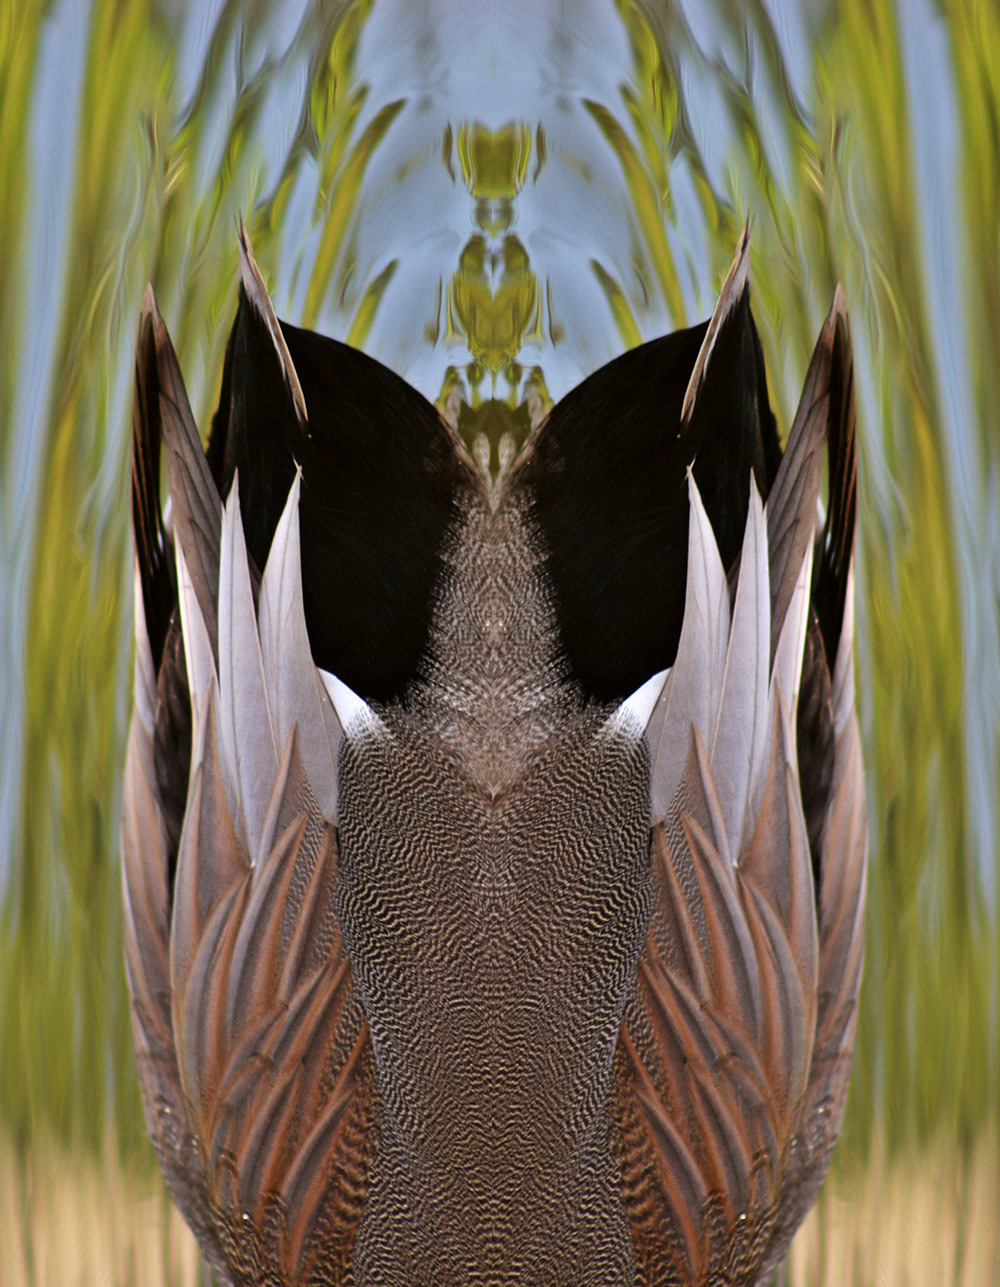 Mirrored image birds tail  feathers color